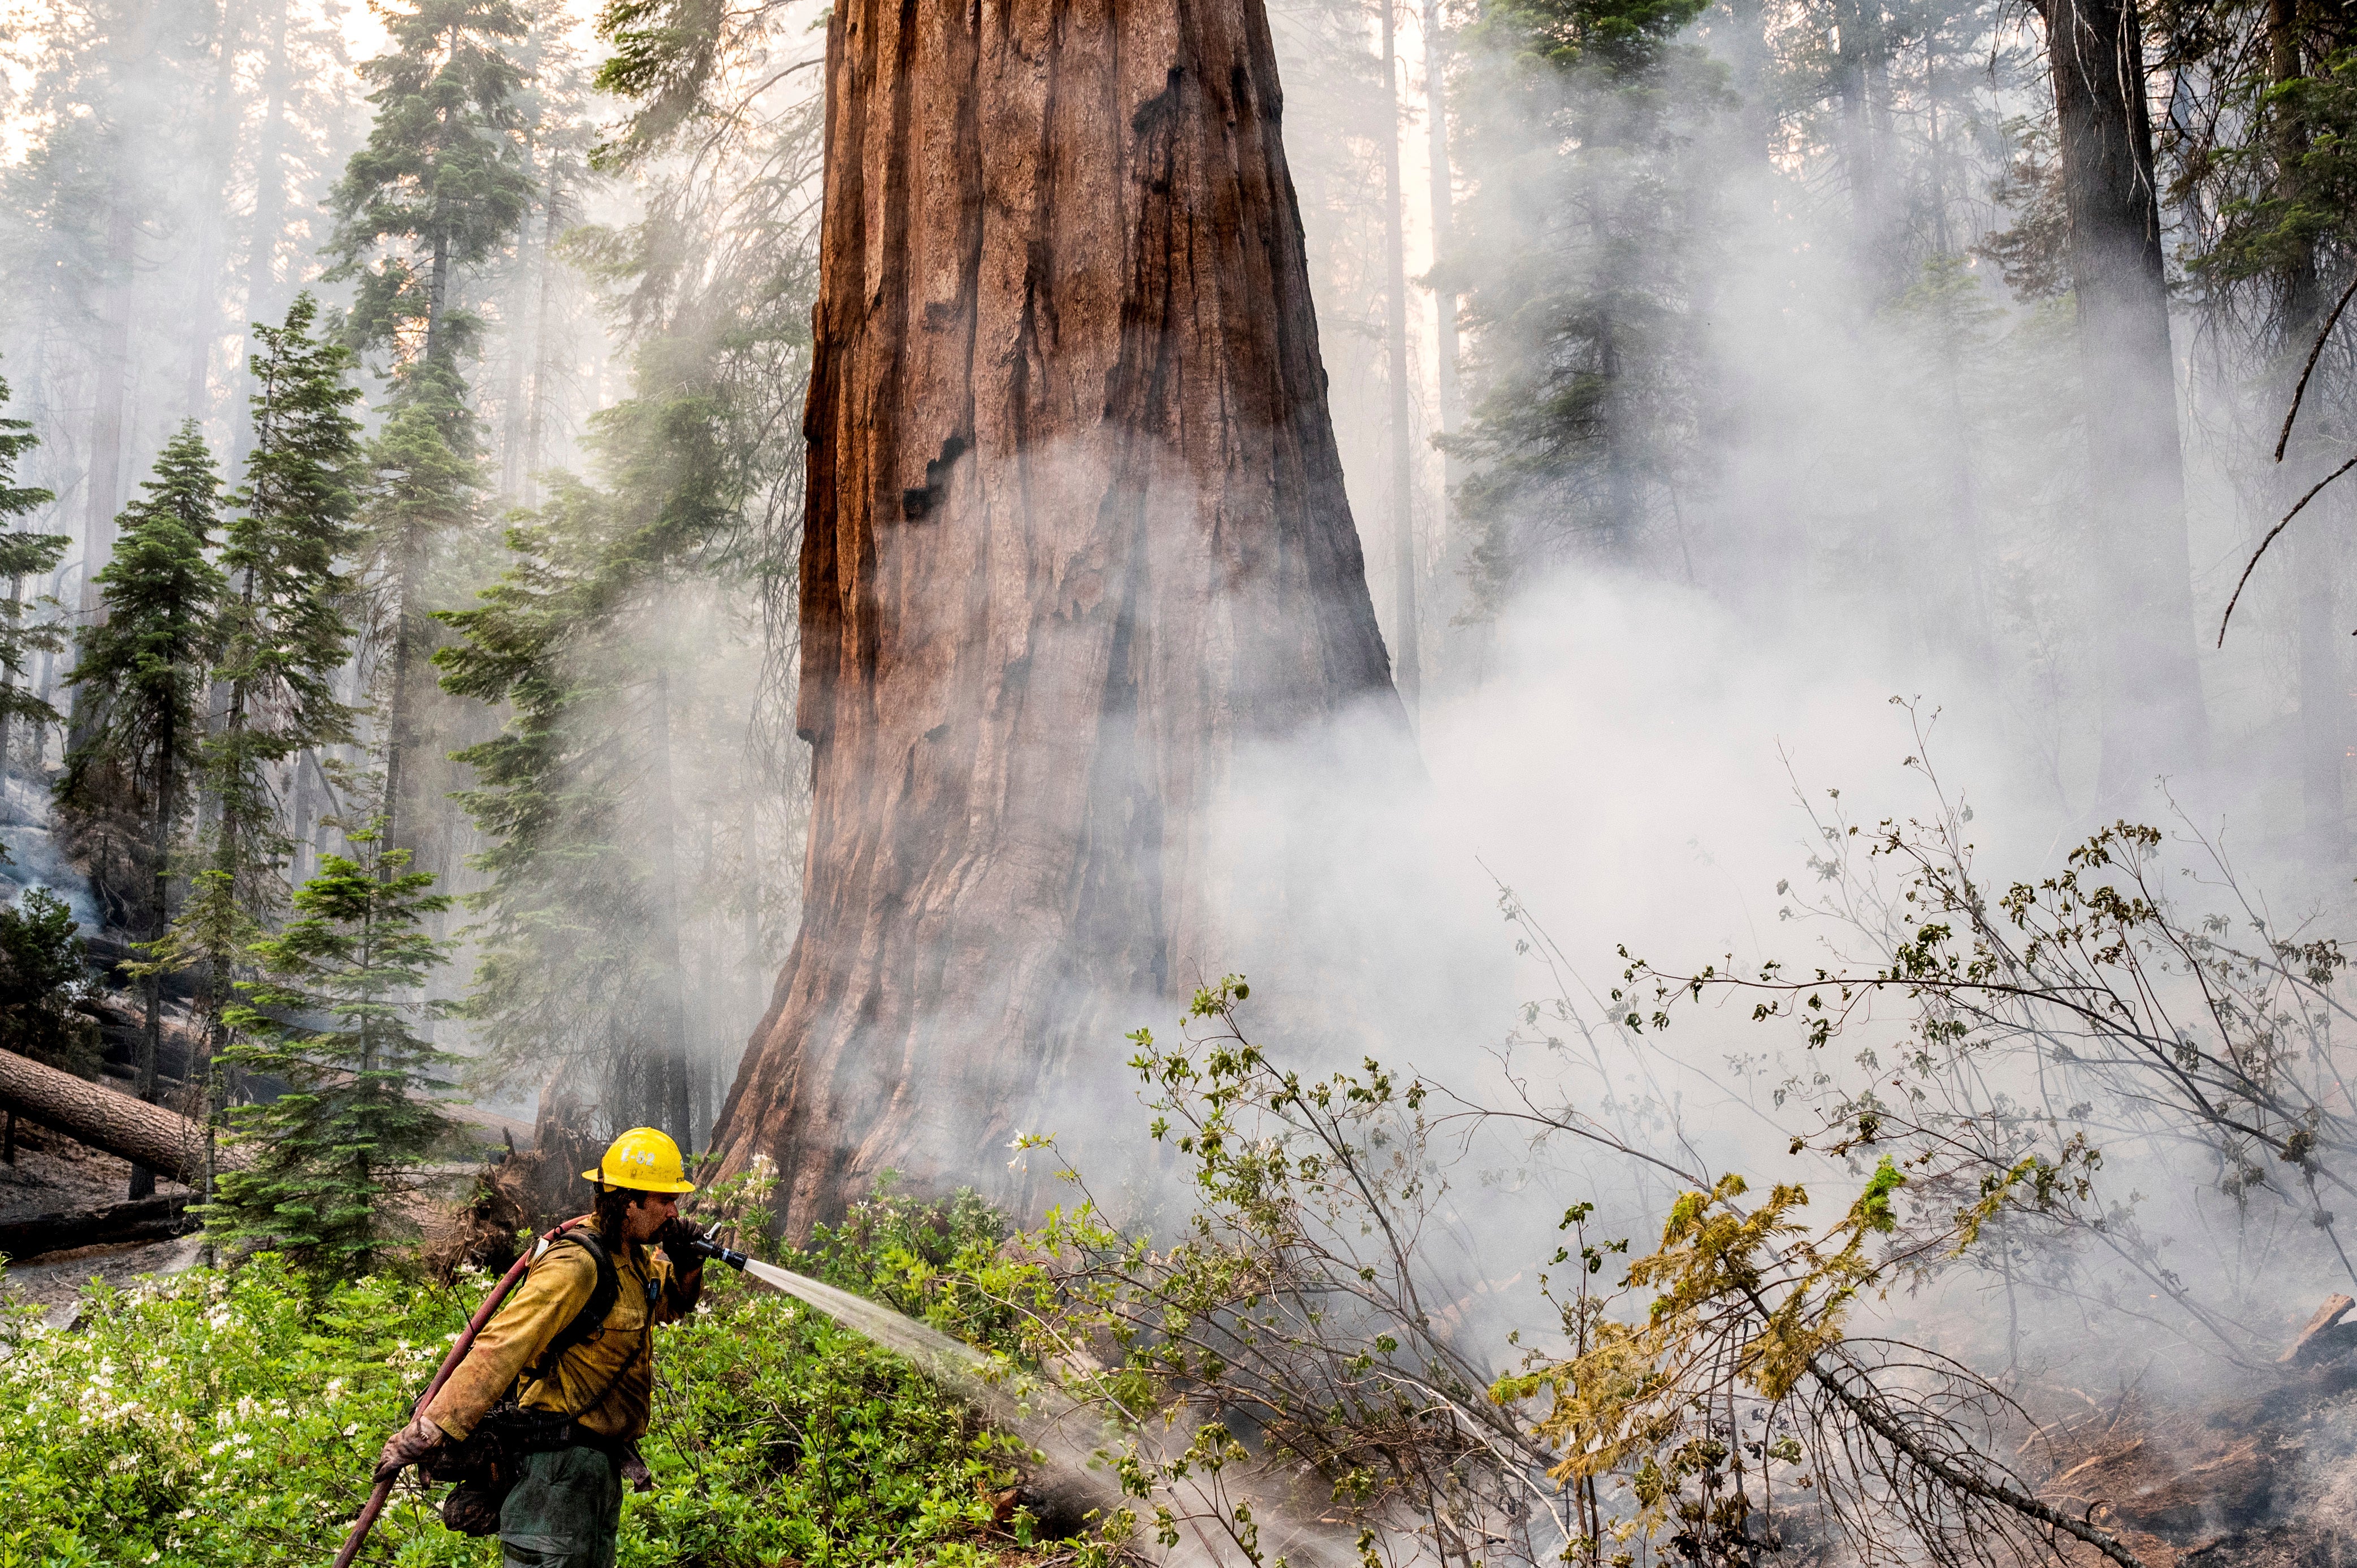 A firefighter protects a sequoia tree as the Washburn Fire burns through Mariposa Grove in Yosemite National Park on Friday, July 8. (Photo: Noah Berger, AP)